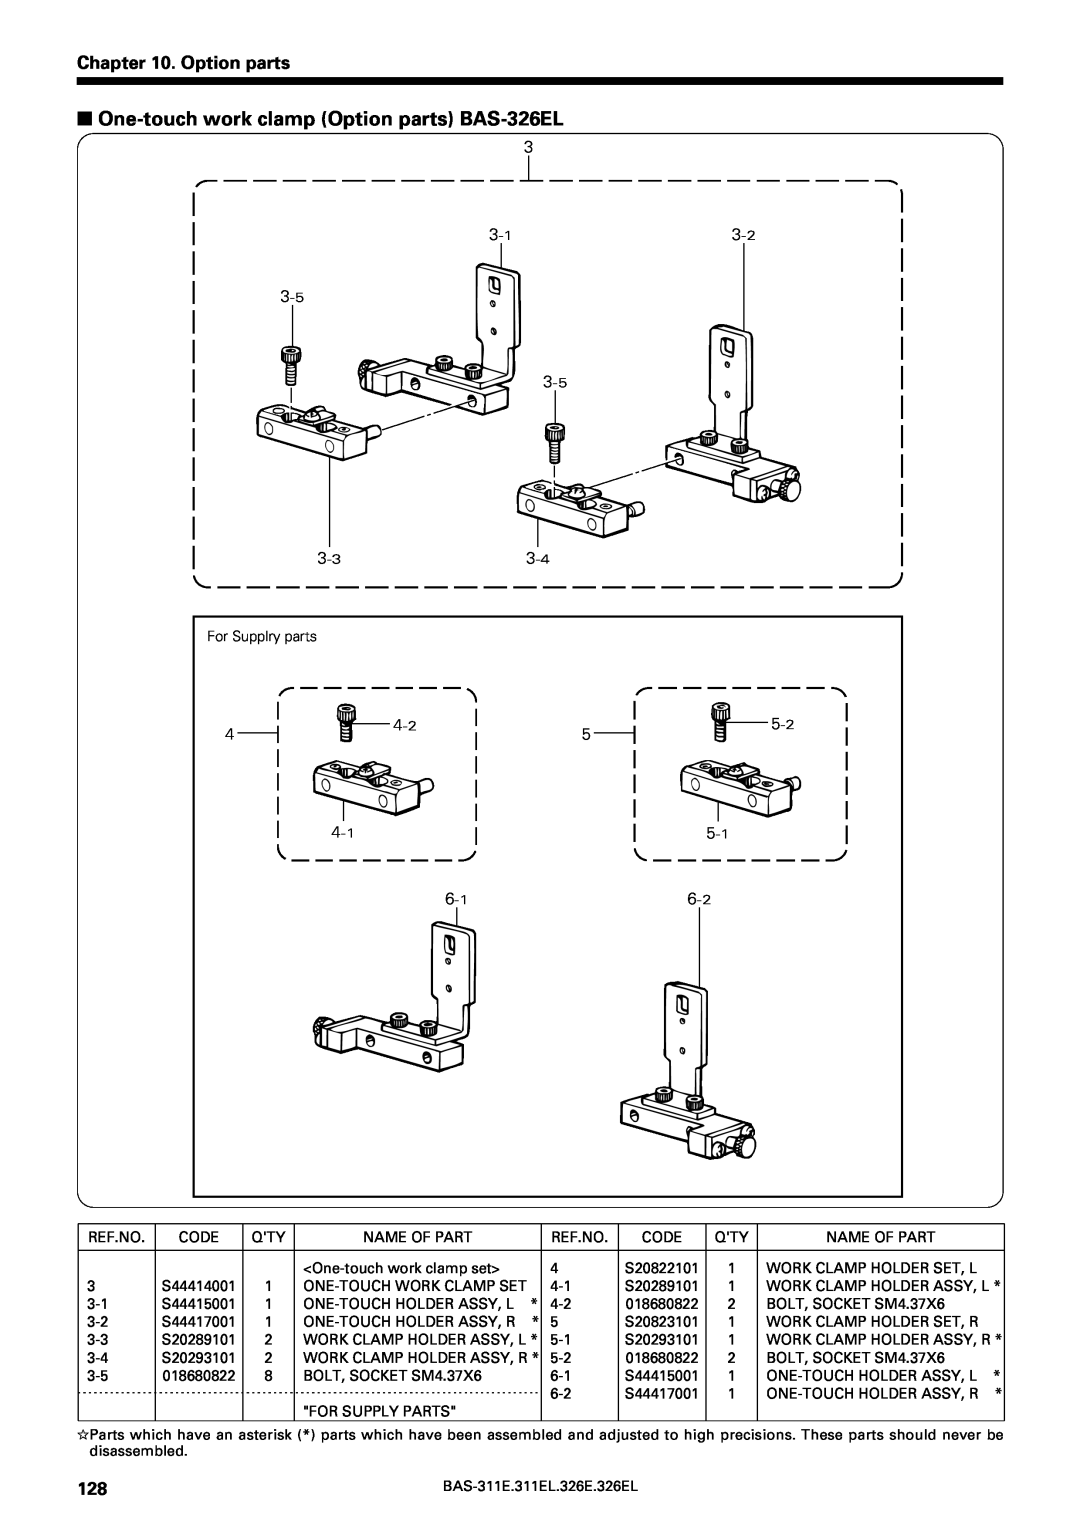 Brother BAS-311E service manual One-touch work clamp Option parts BAS-326EL 